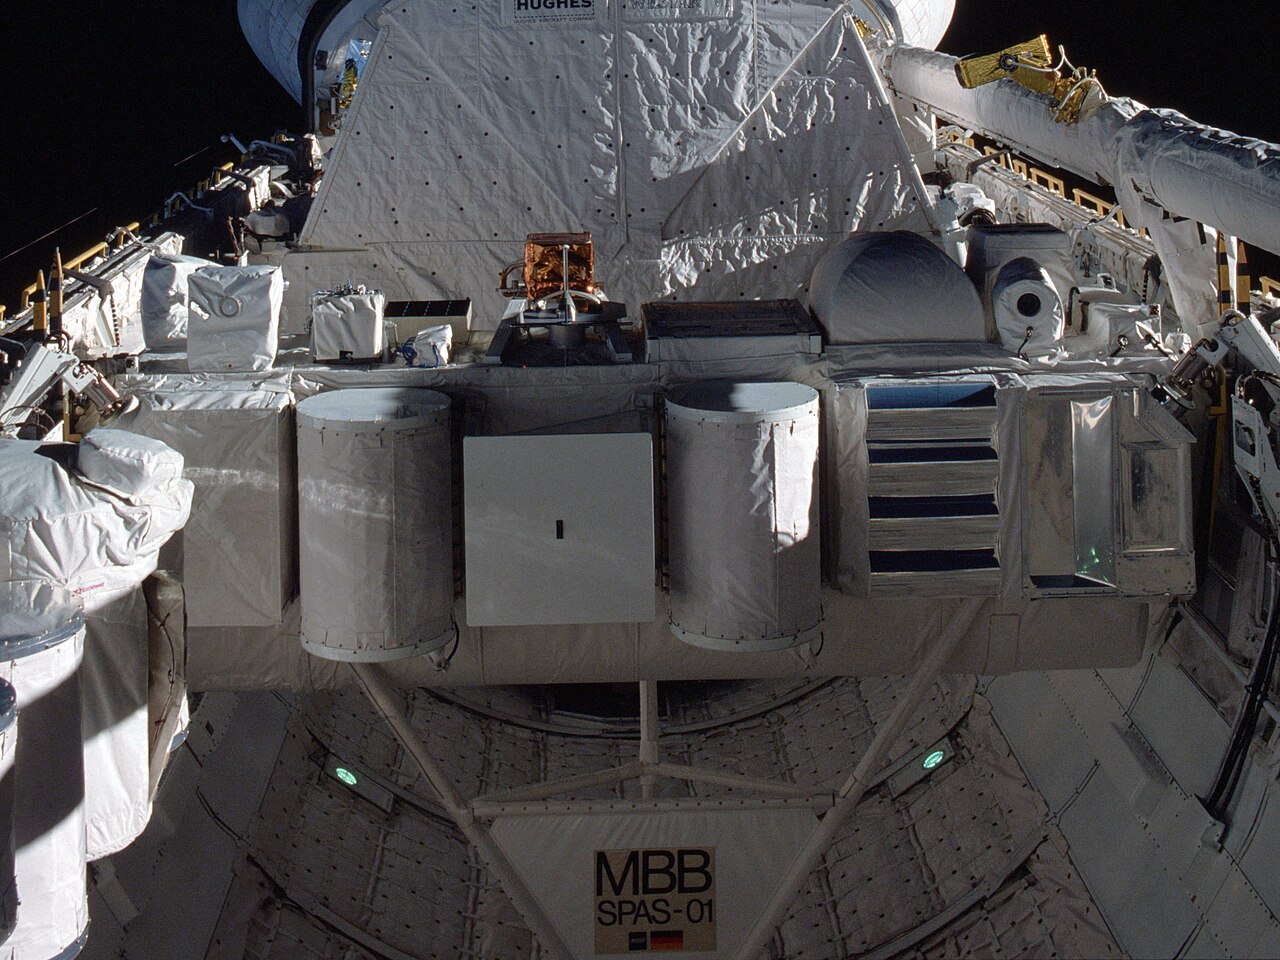 The Shuttle Pallet Satellite-01A (SPAS-01A) in Challenger’s payload bay